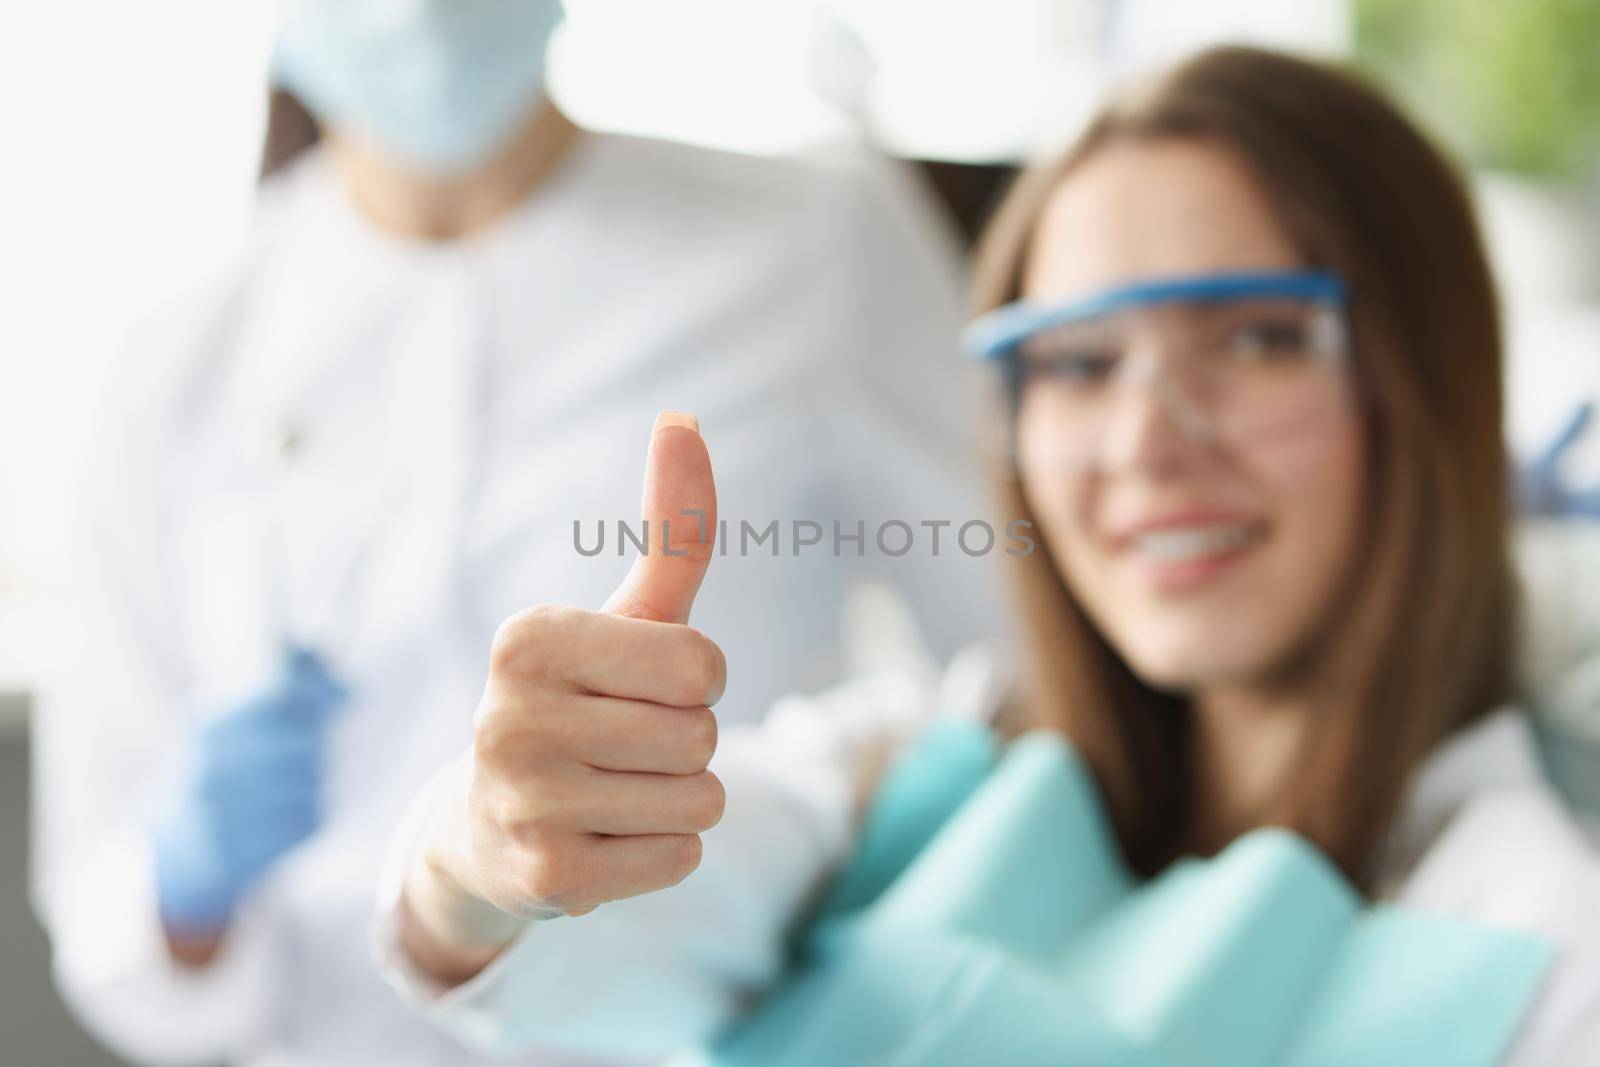 A woman at the dentist shows a thumbs up gesture, blurry, close-up. Professional dental care, satisfied patient